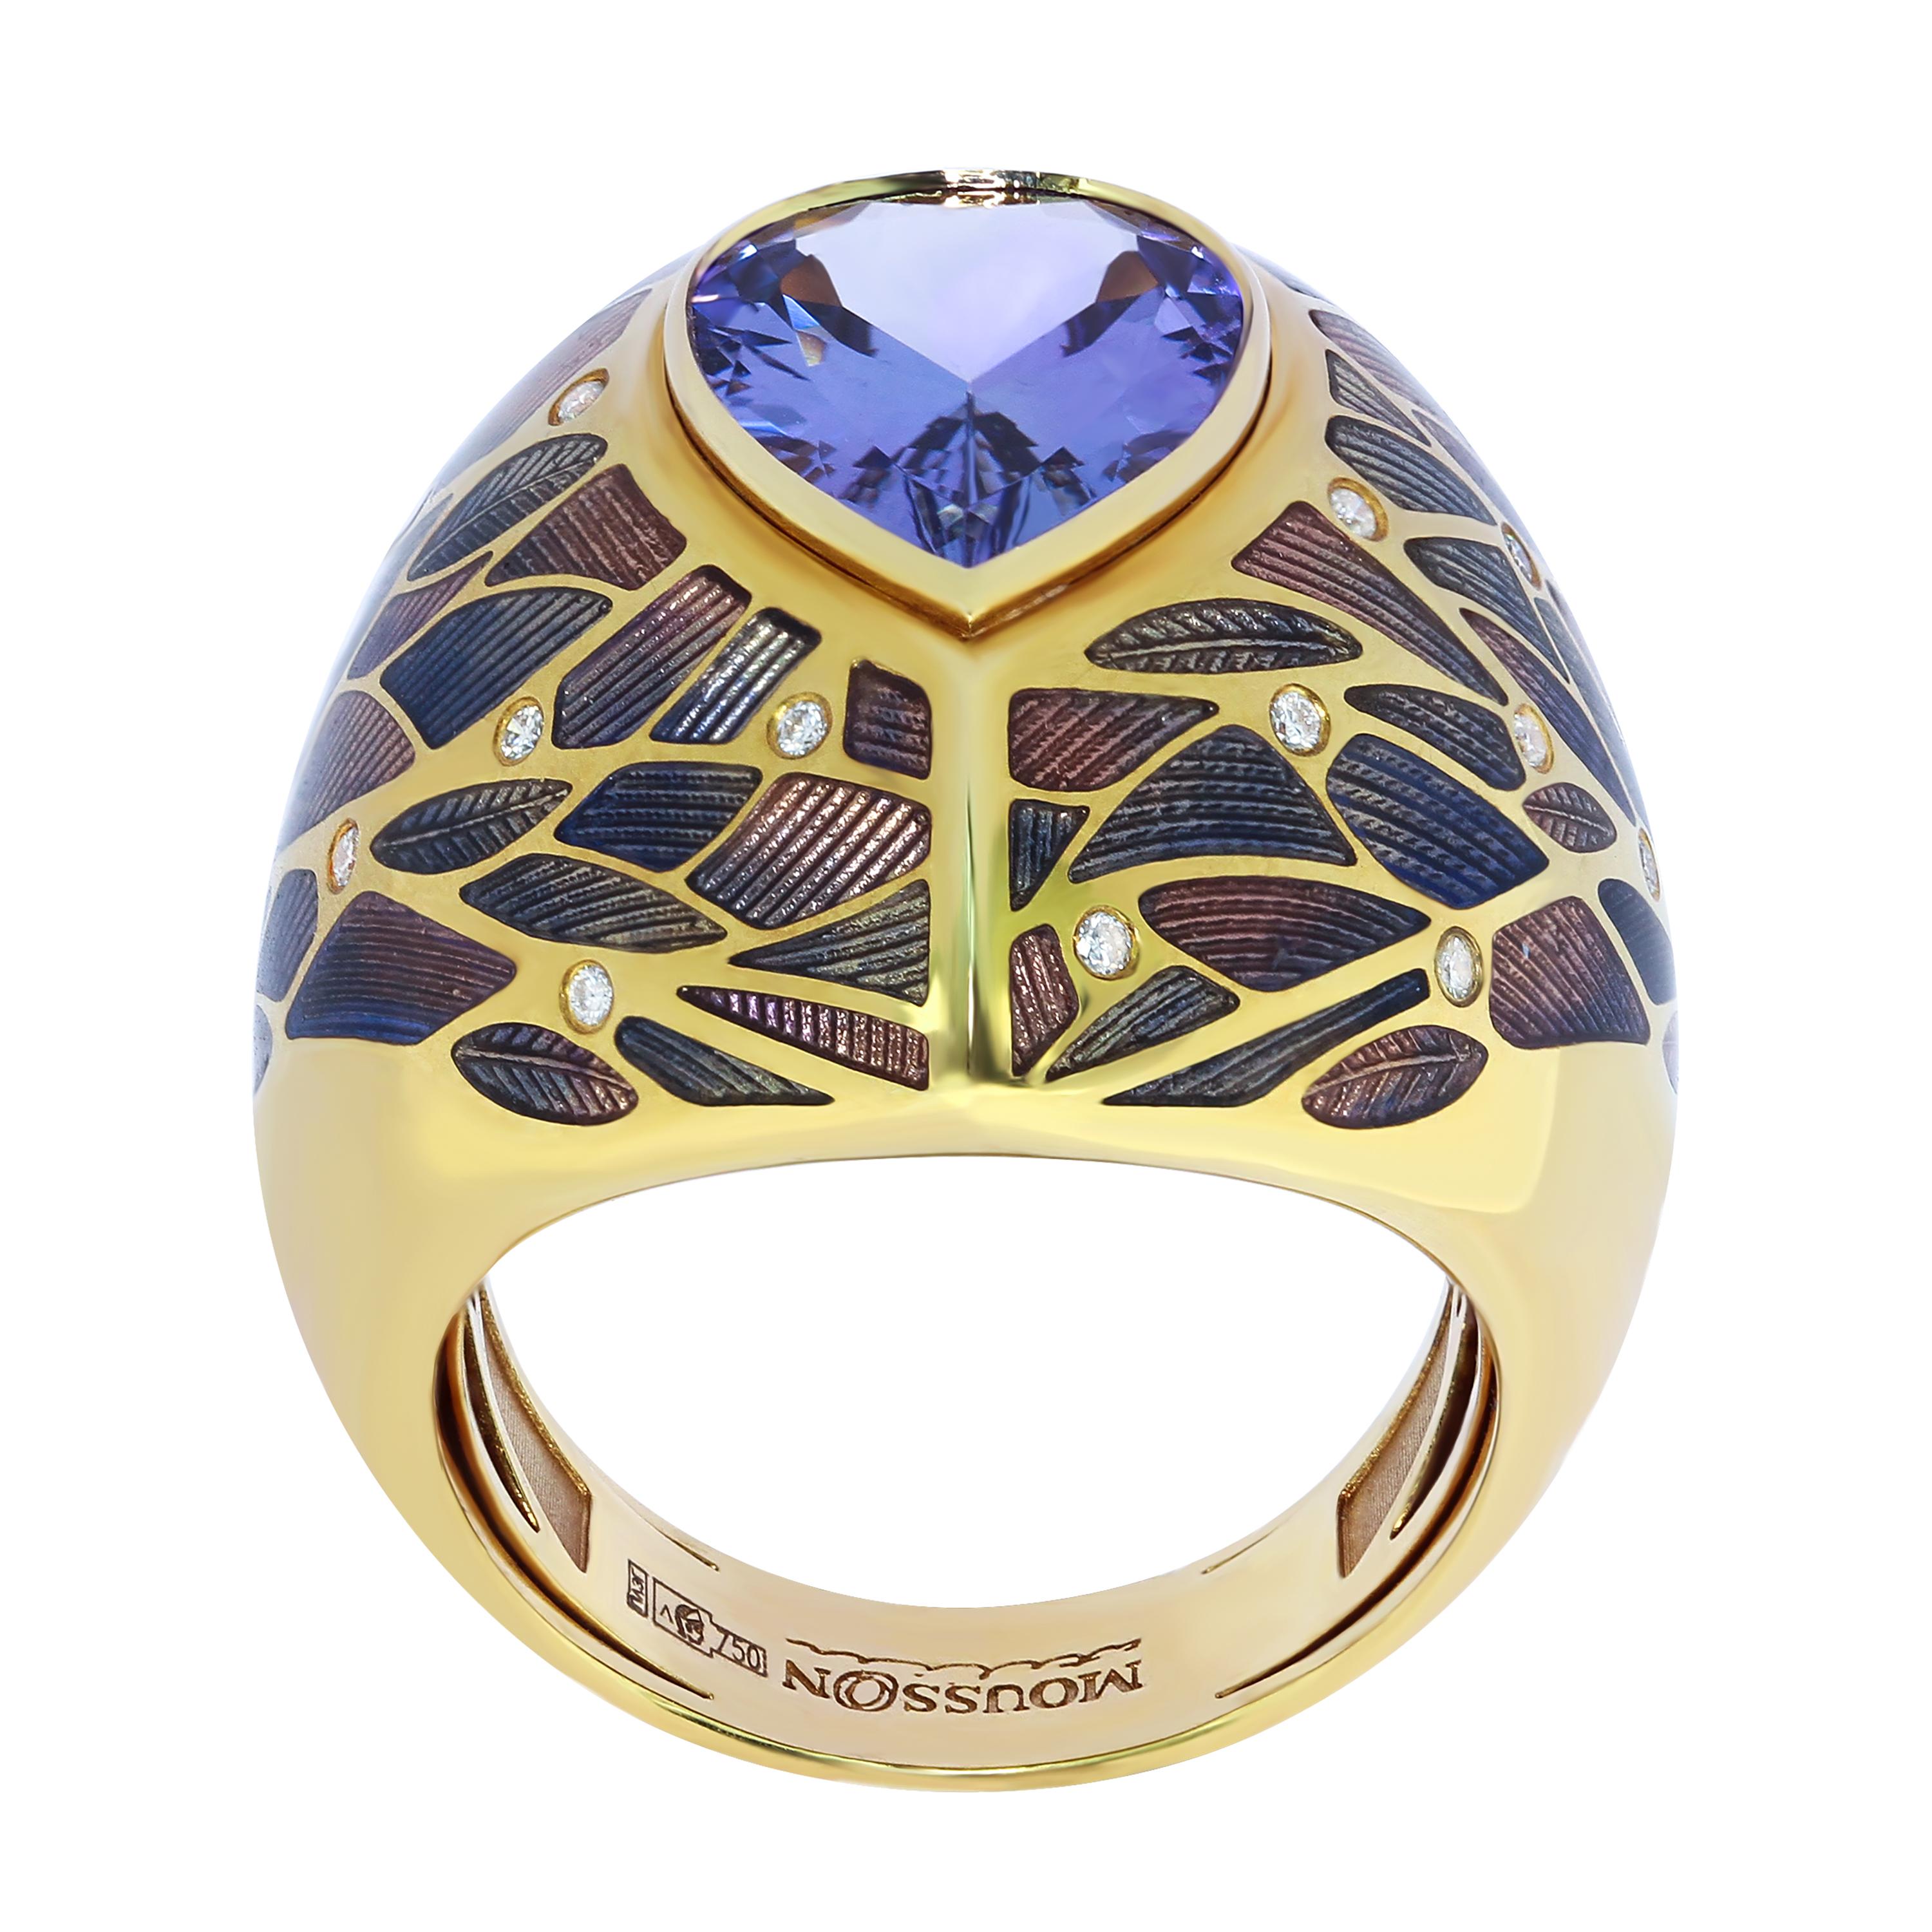 Tanzanite 3.76 Carat Diamonds 18 Karat Yellow Gold Four Seasons Ring
Ring from the Four Seasons Collection is more like a transition from autumn to winter. The patterns on Yellow 18 Karat Gold are made from specially selected shades of Enamel to